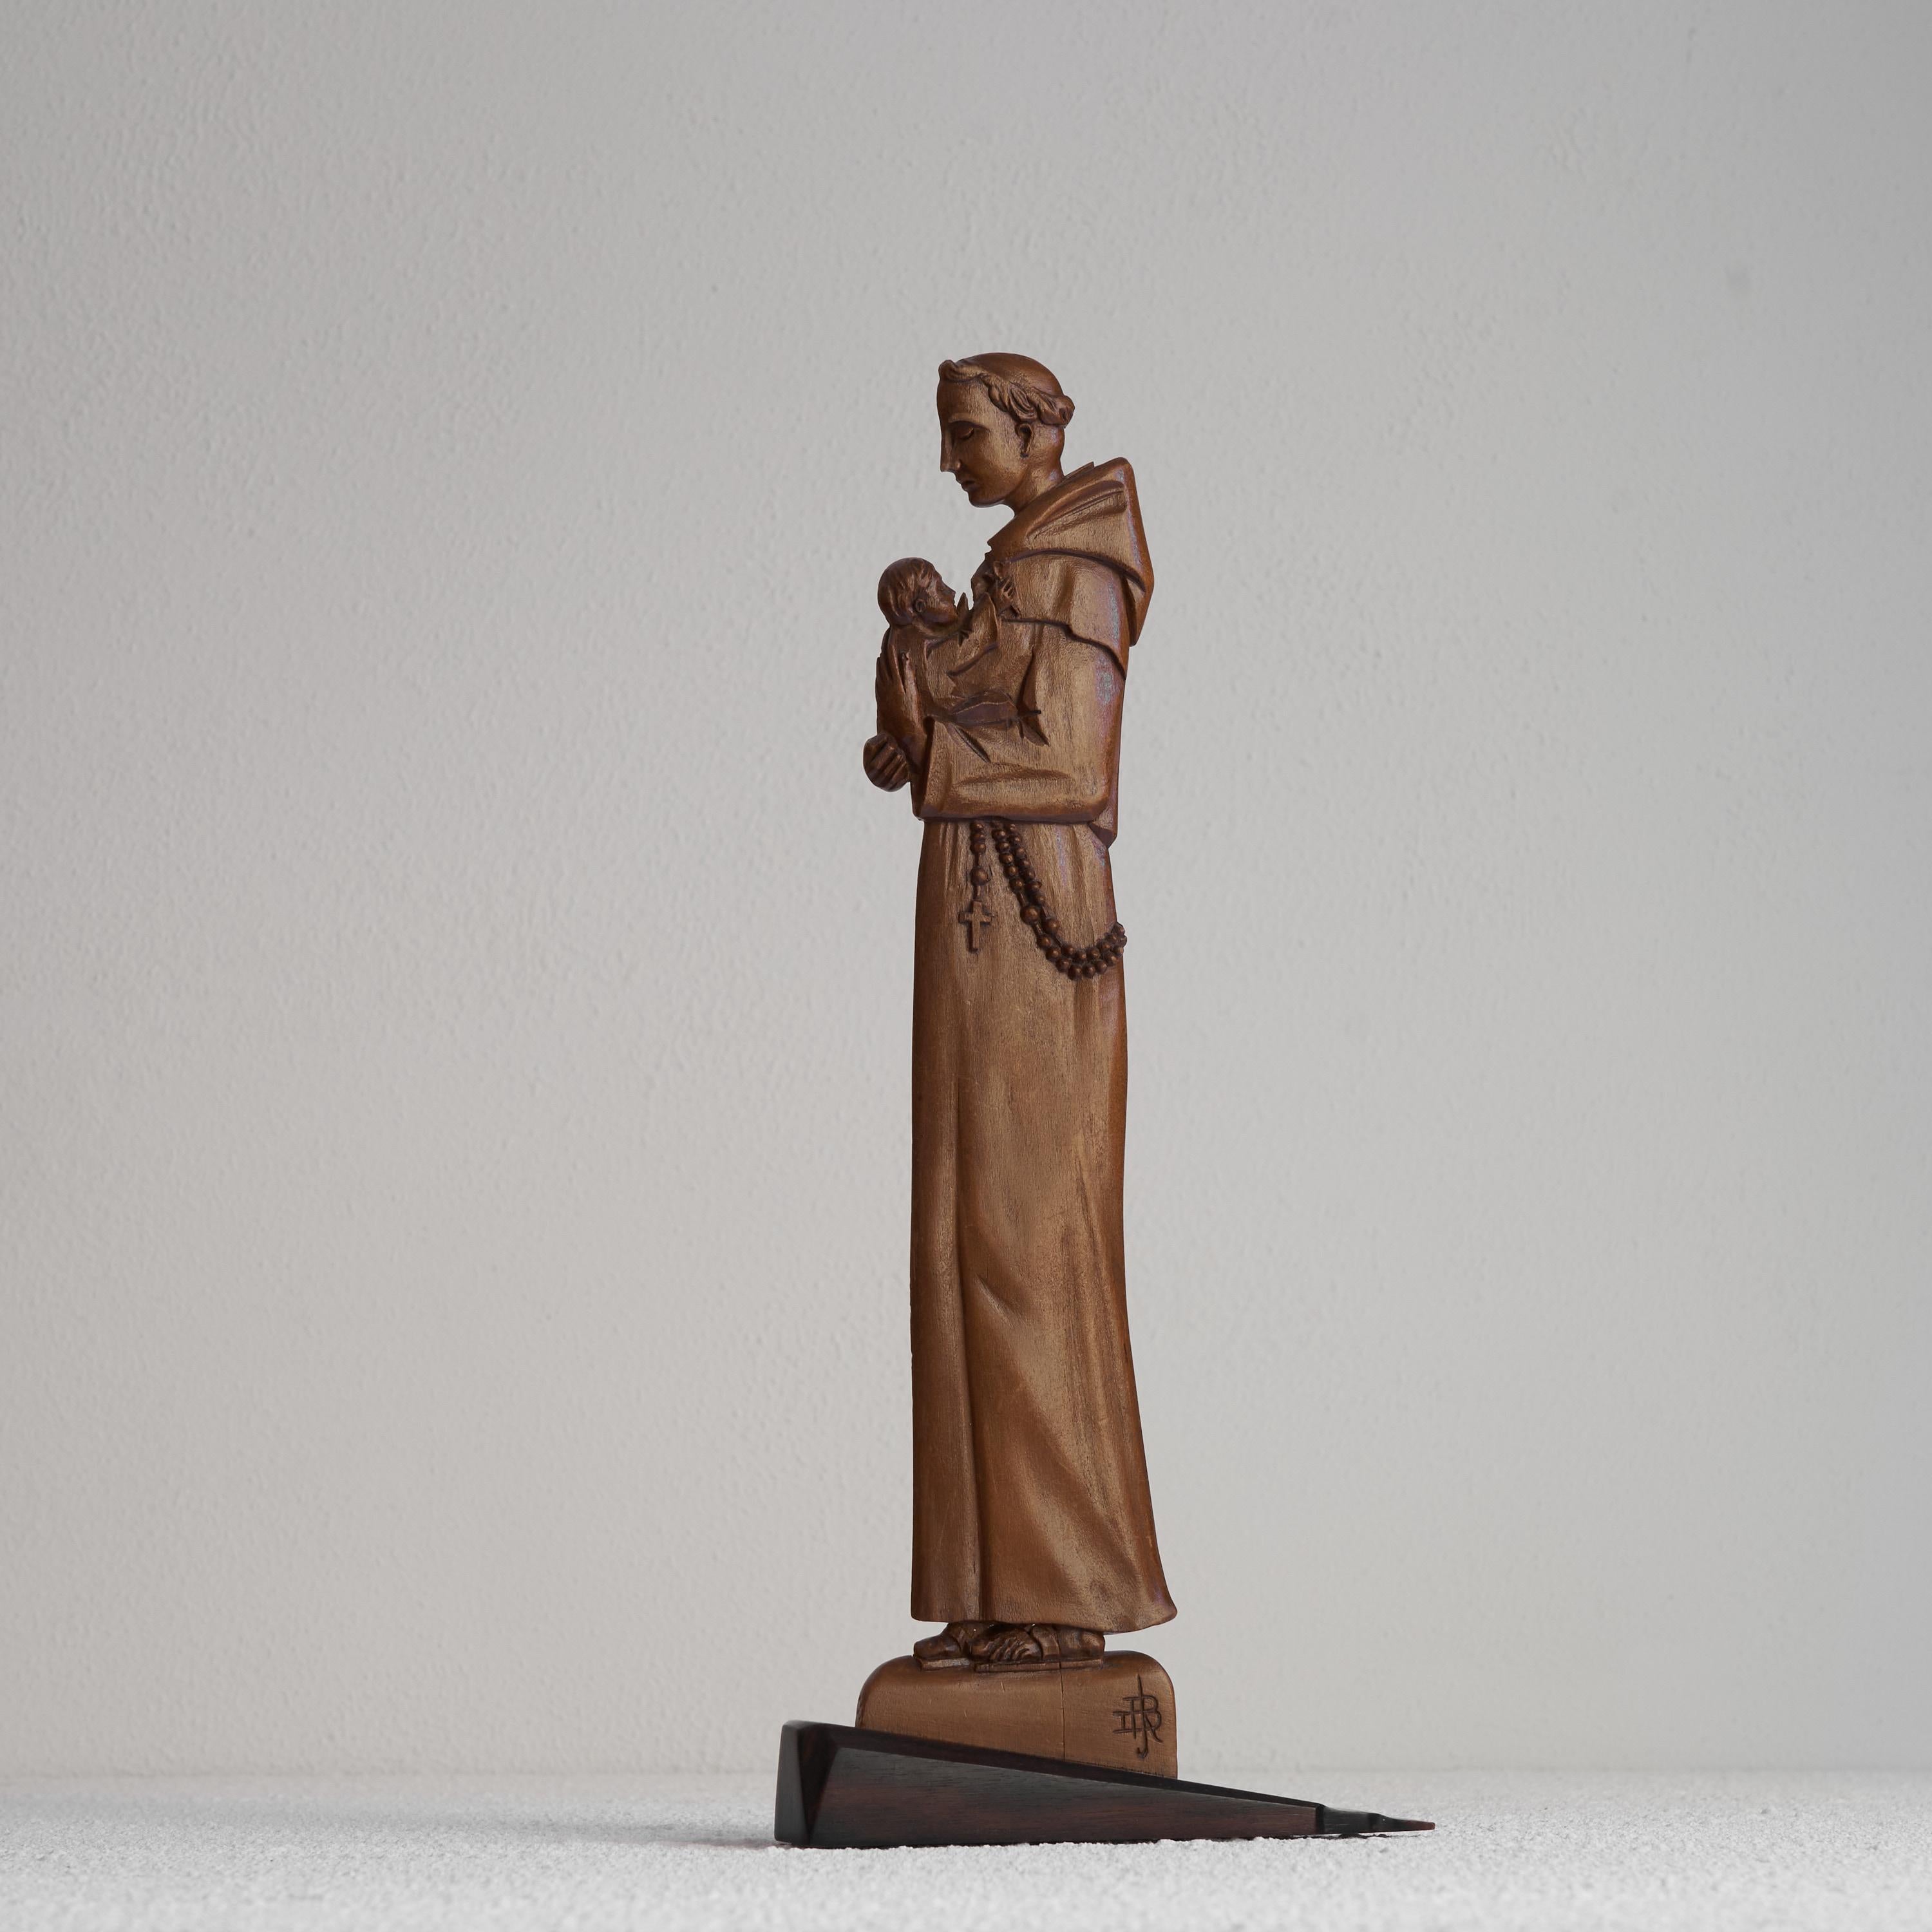 Distinct Hand Carved Art Deco Sculpture of a Religious Man with child. Early 20th century.

Distinct and skillfully hand-carved art deco wood sculpture of a religious man with child. Very art deco with sharp lines and the use of 'en-profile' in